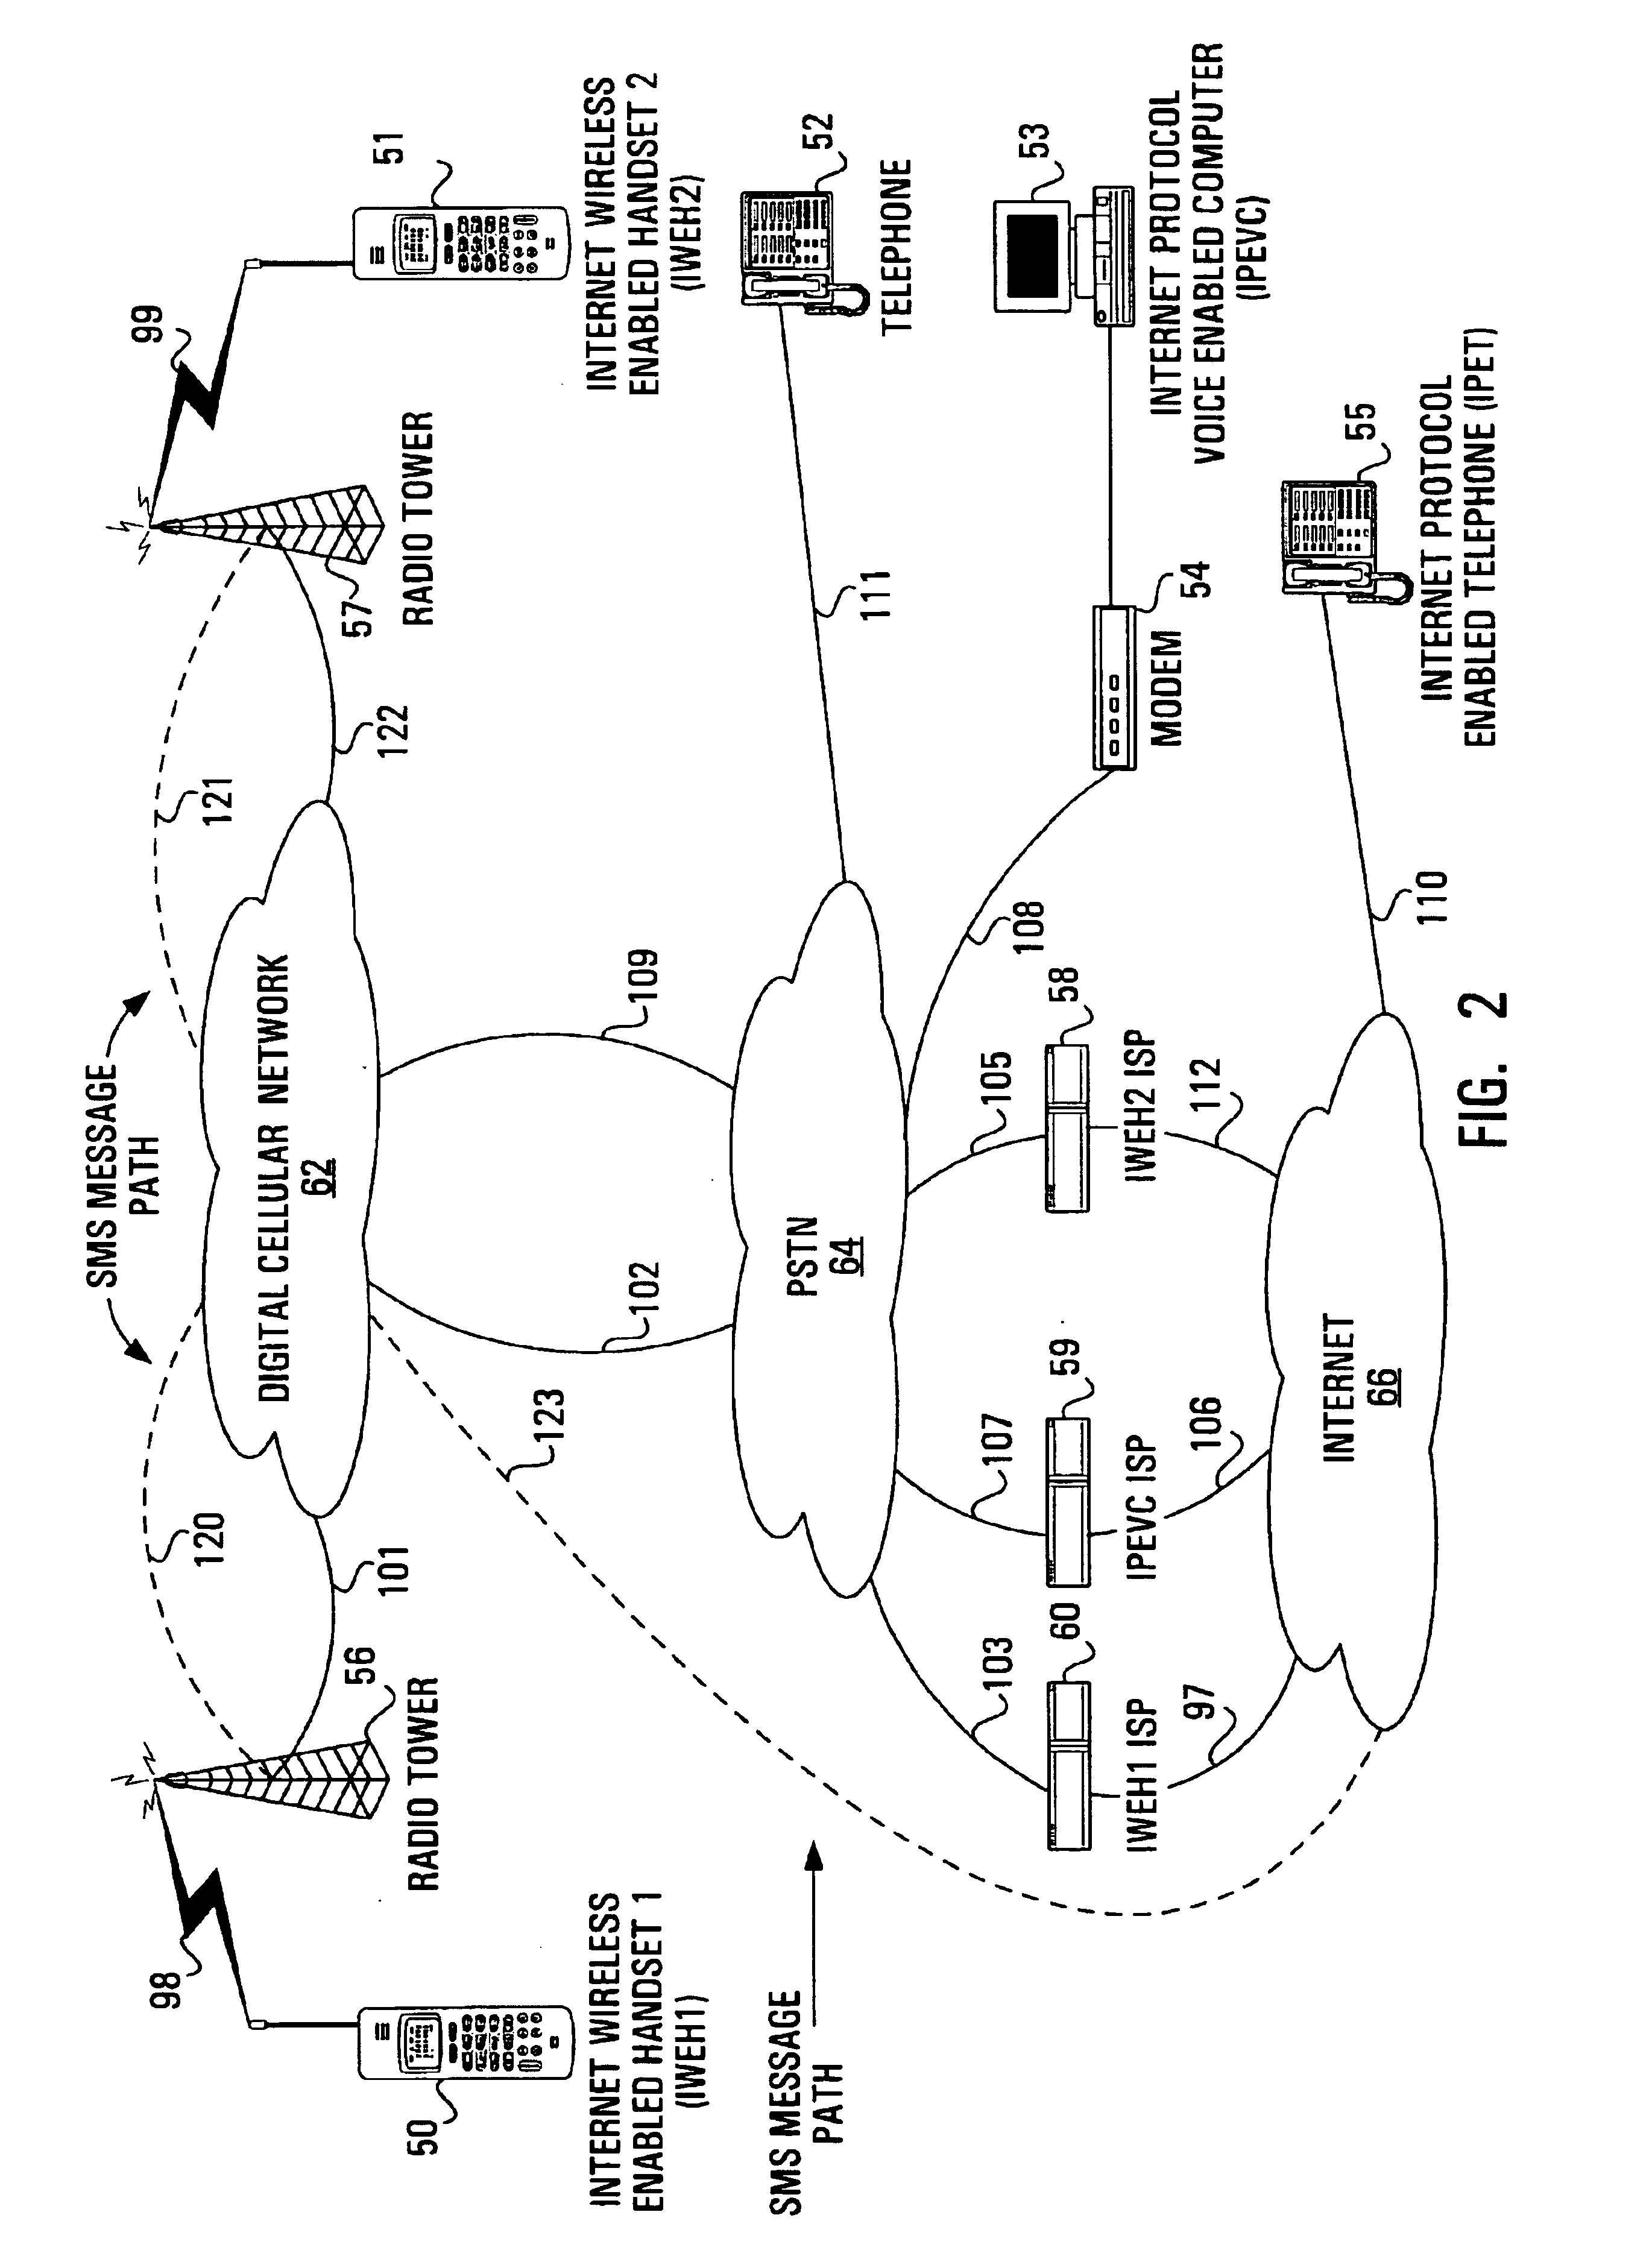 Method and apparatus for digital cellular internet voice communications